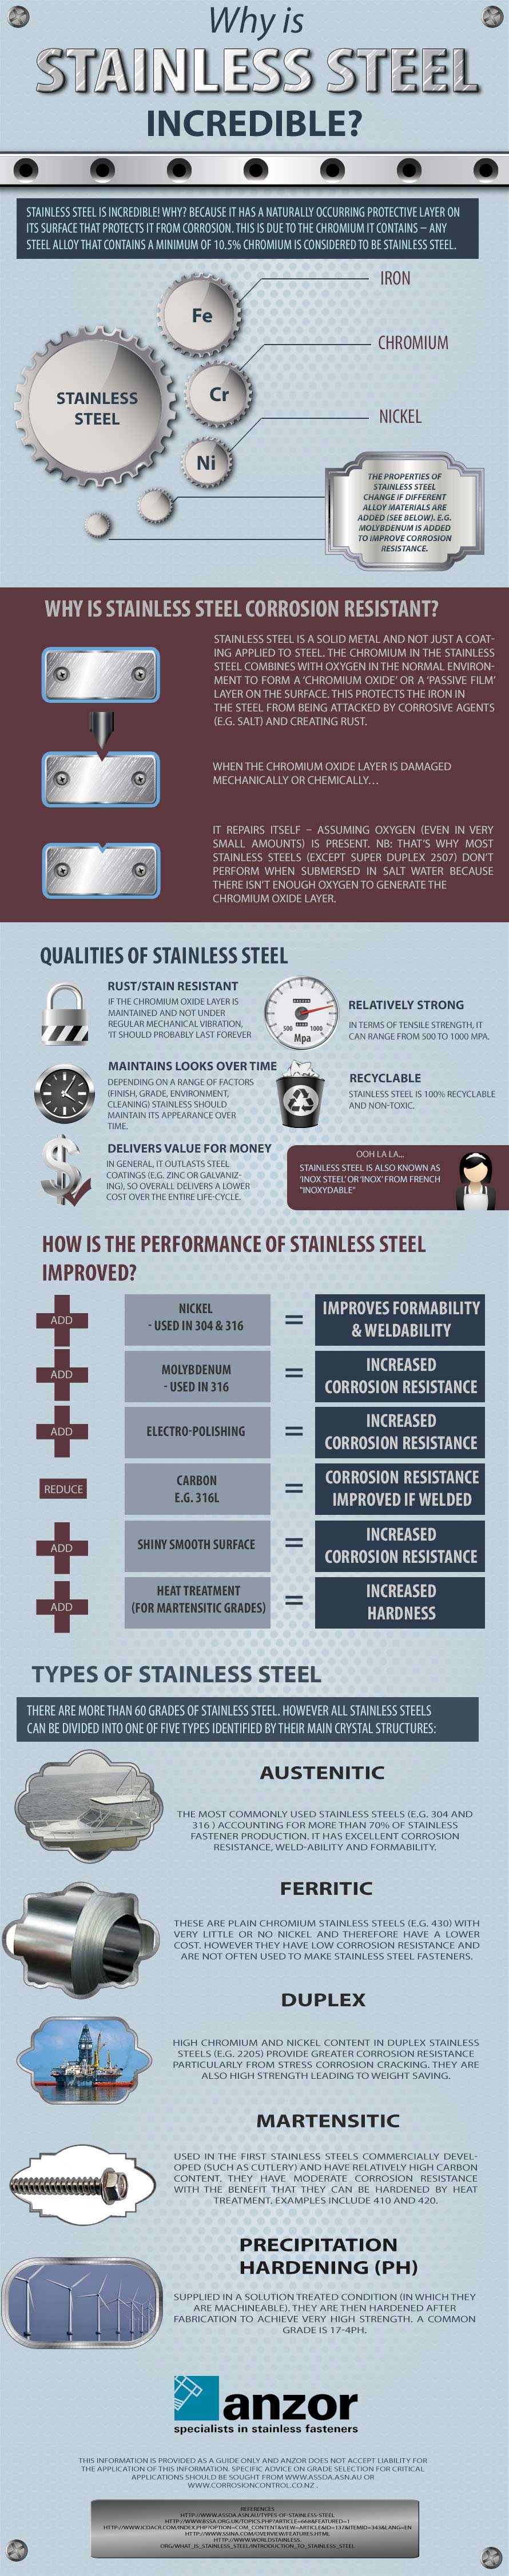 StainlessSteel.Infographic